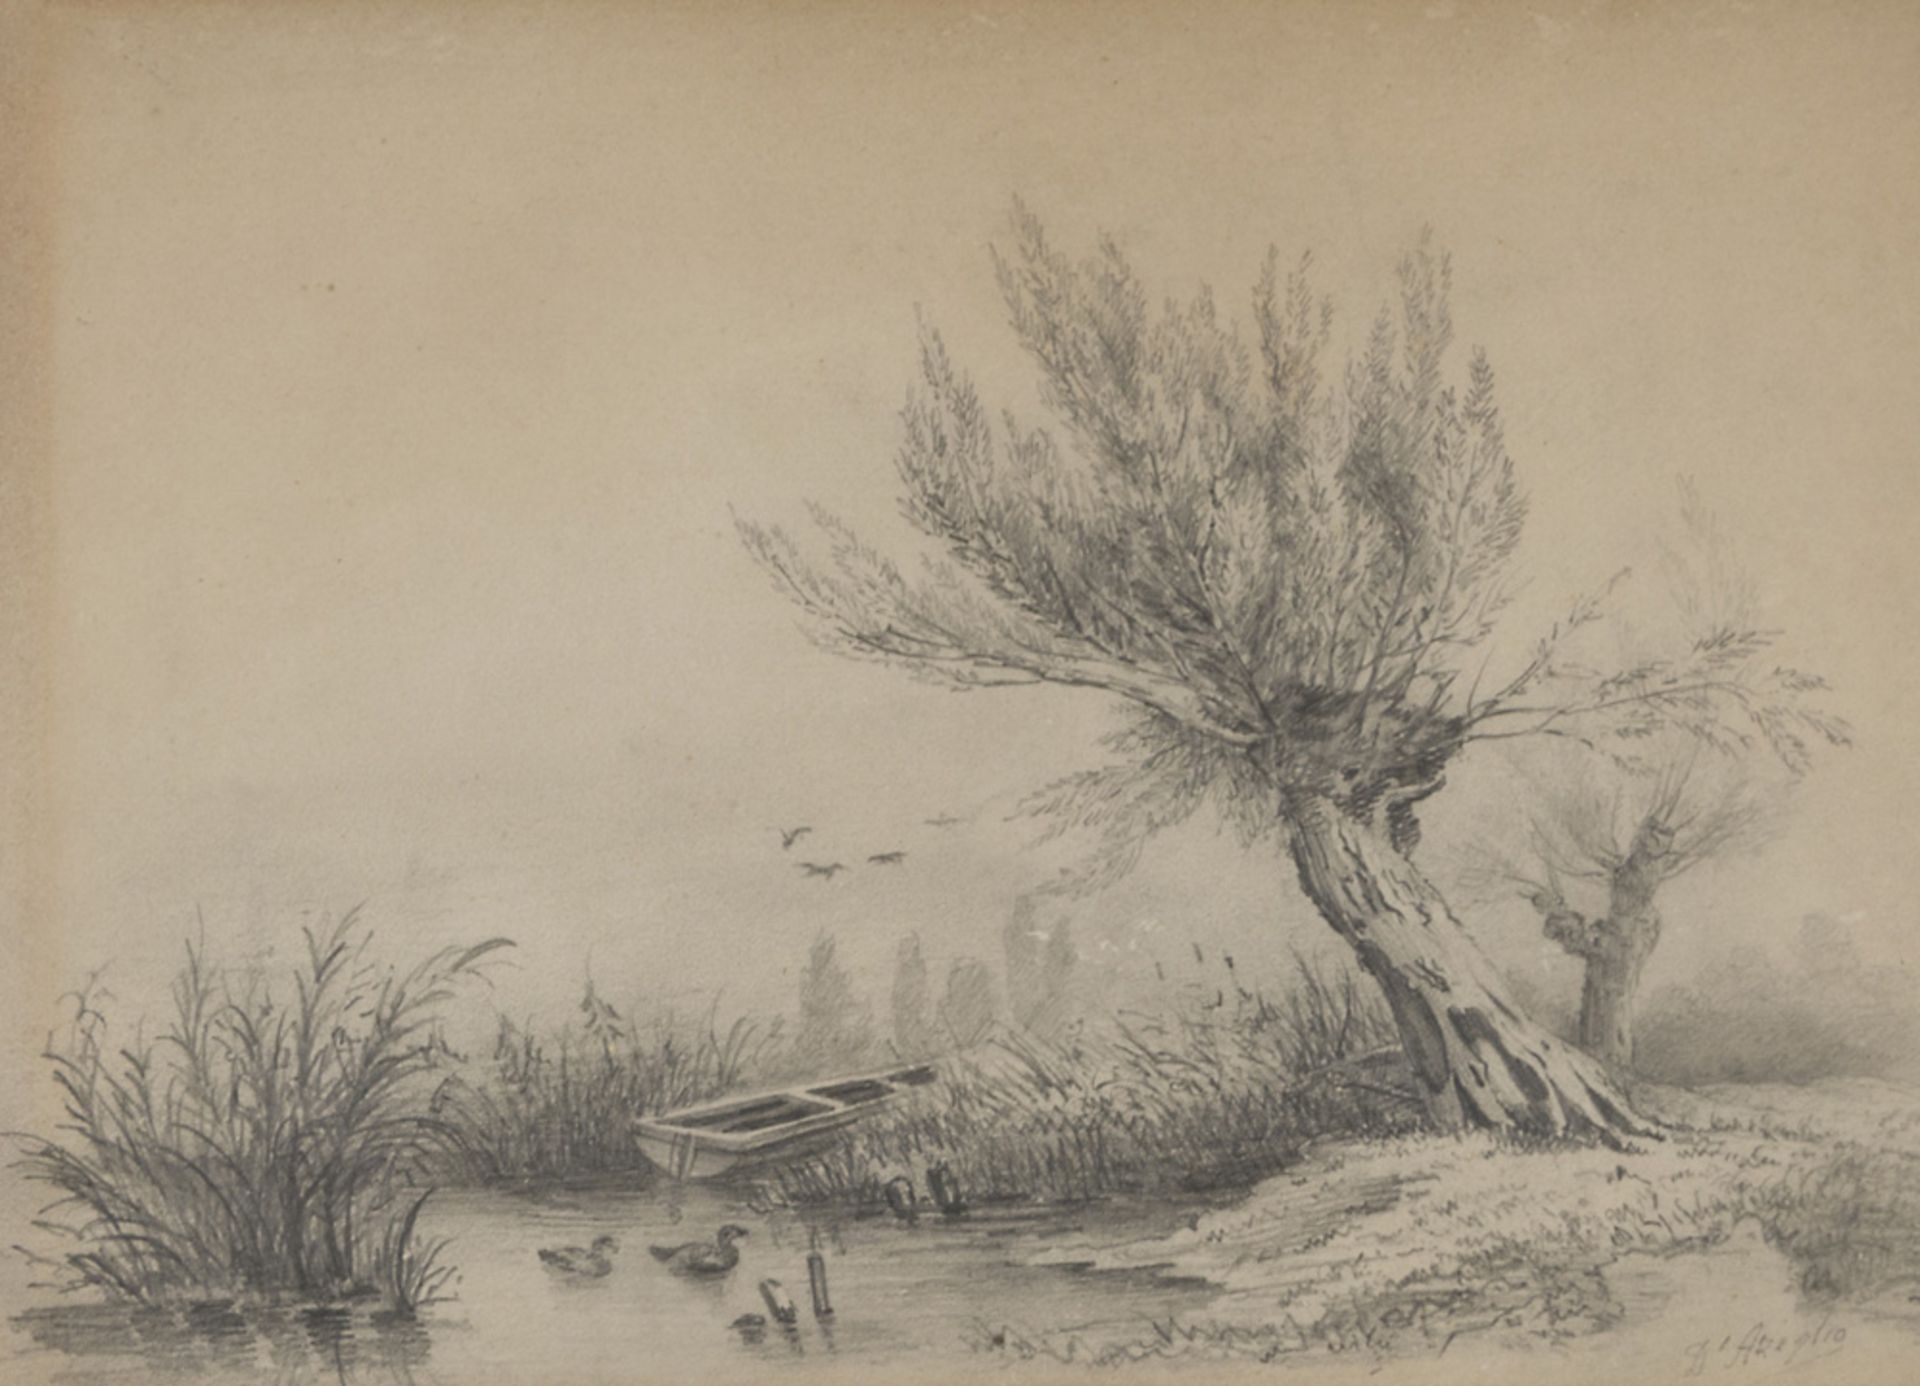 ITALIAN PAINTER, END 19TH CENTURY LANDSCAPE WITH POND Pencil on paper, cm. 18 x 25 Signed 'Of